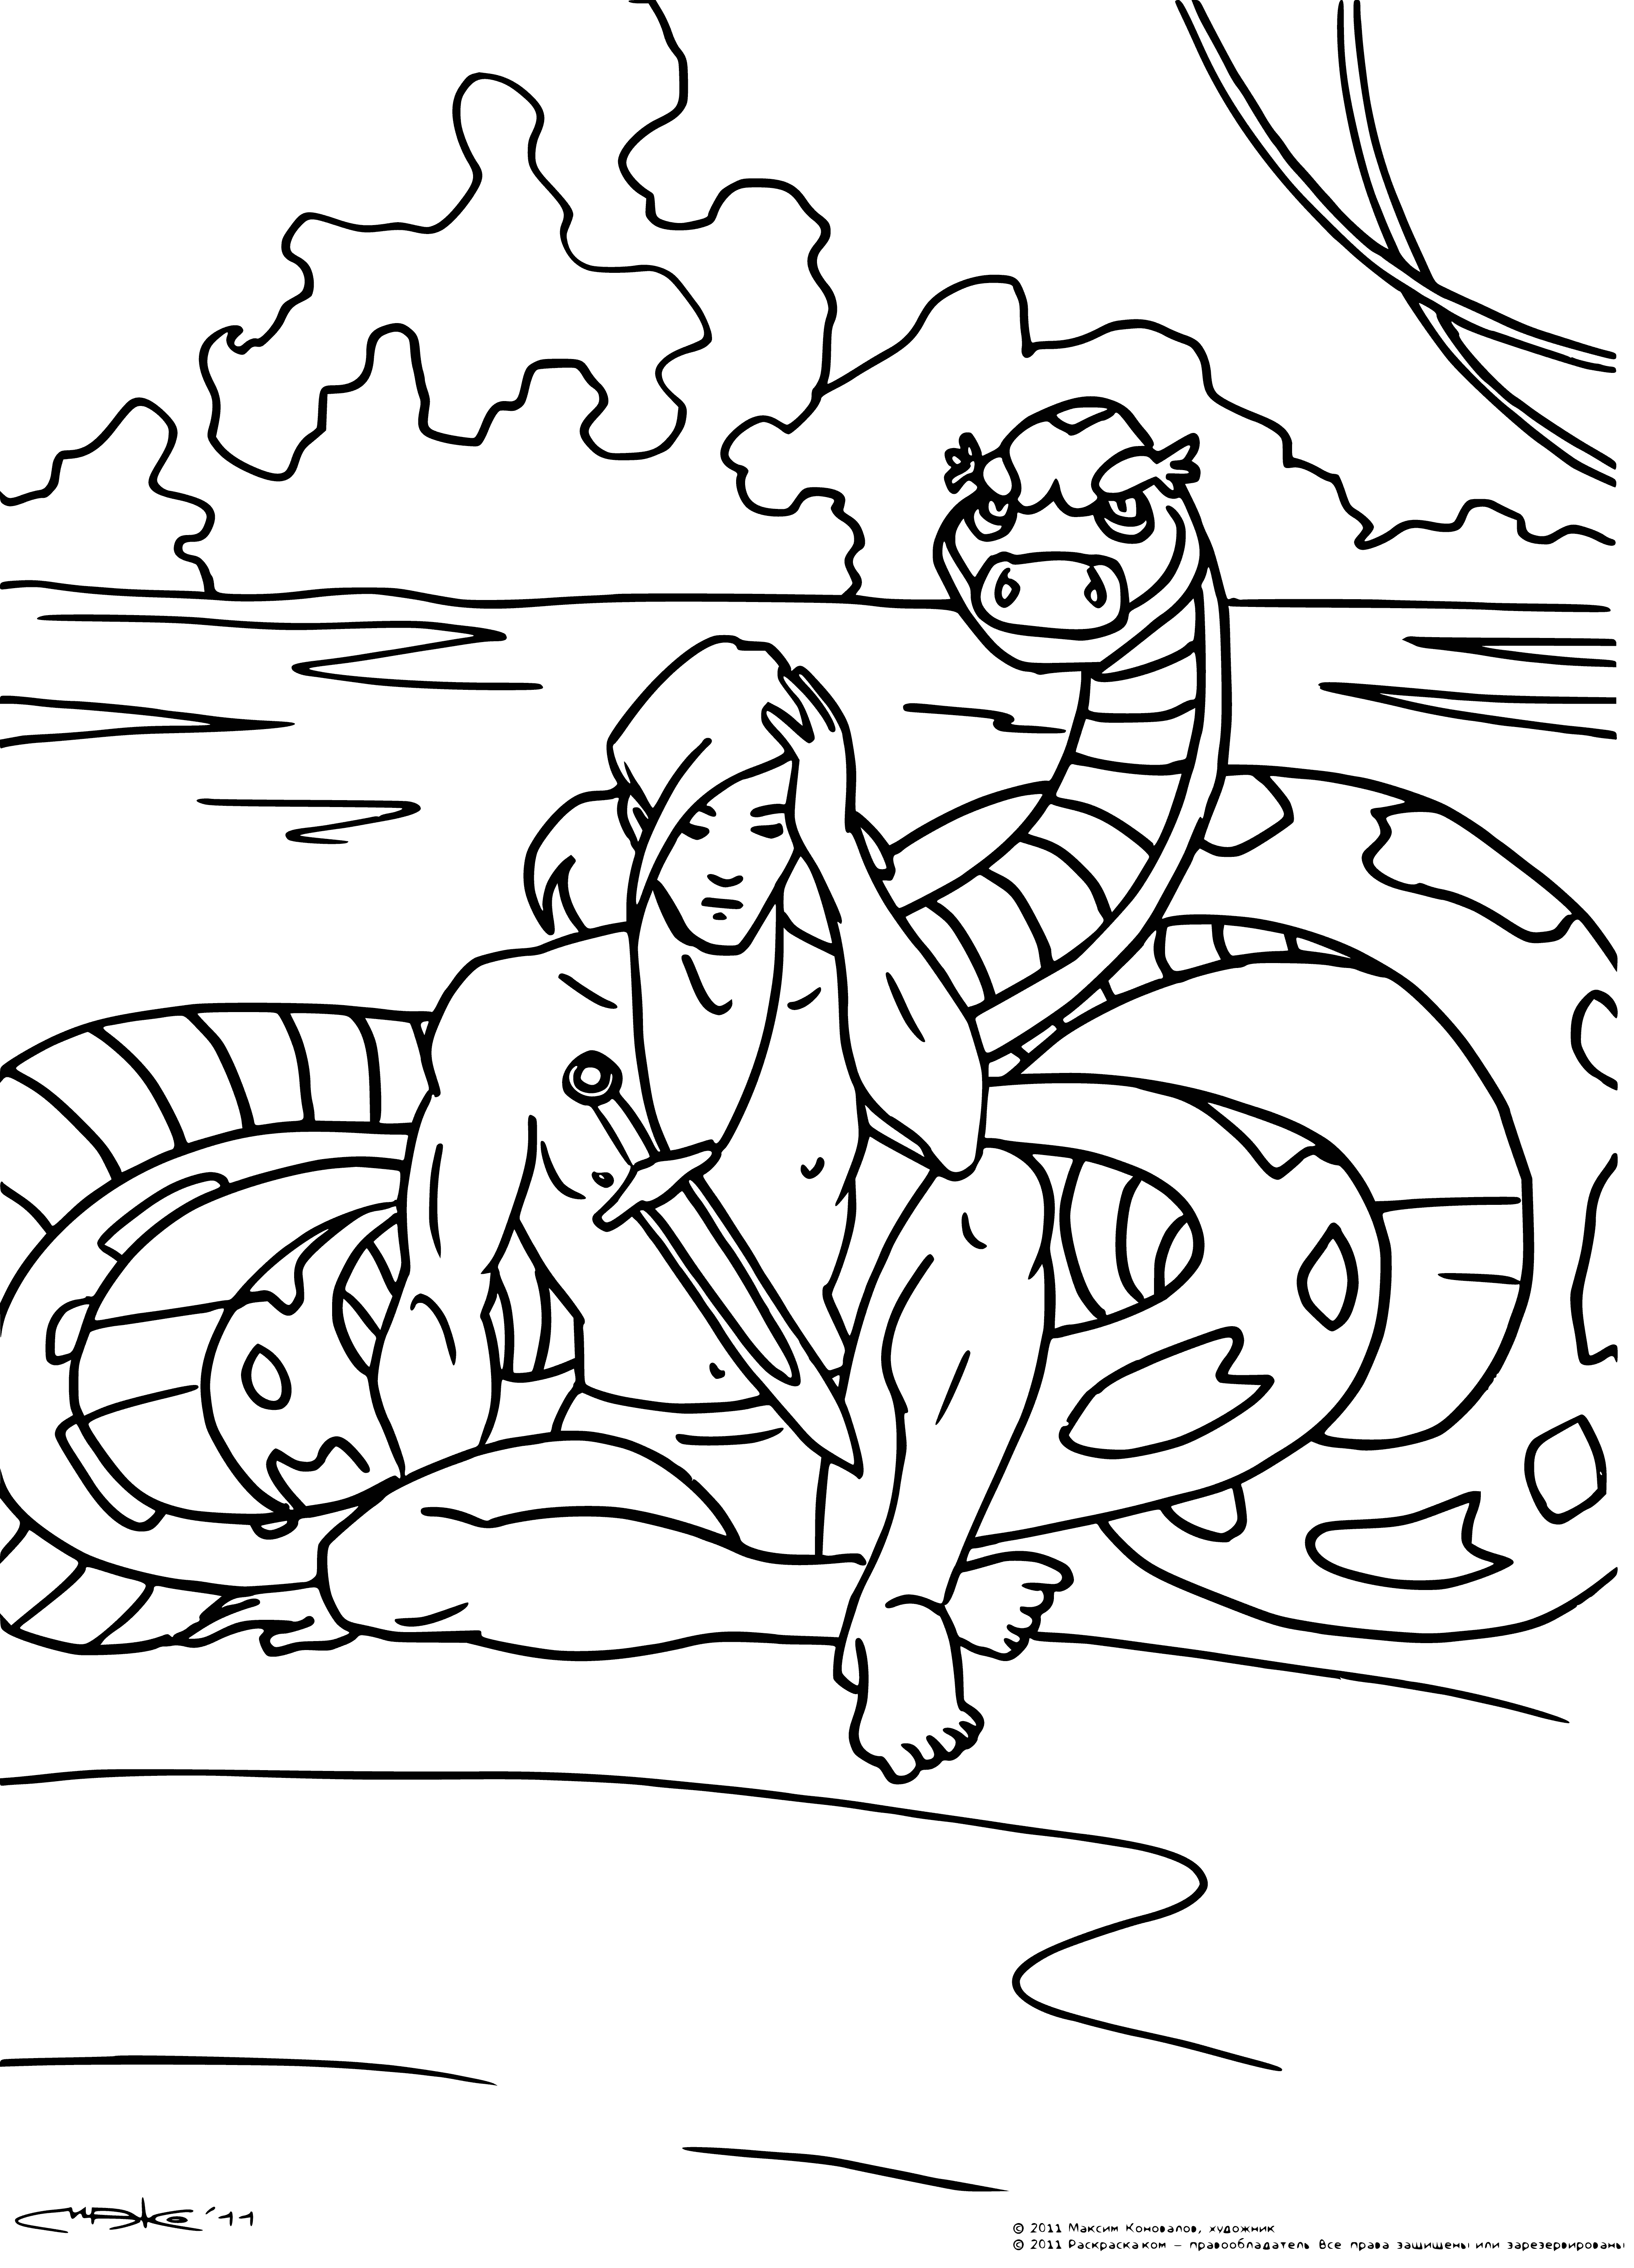 coloring page: Mowgli is listening intently to Kaa as they have a deep conversation, their heads touching in a peaceful moment.